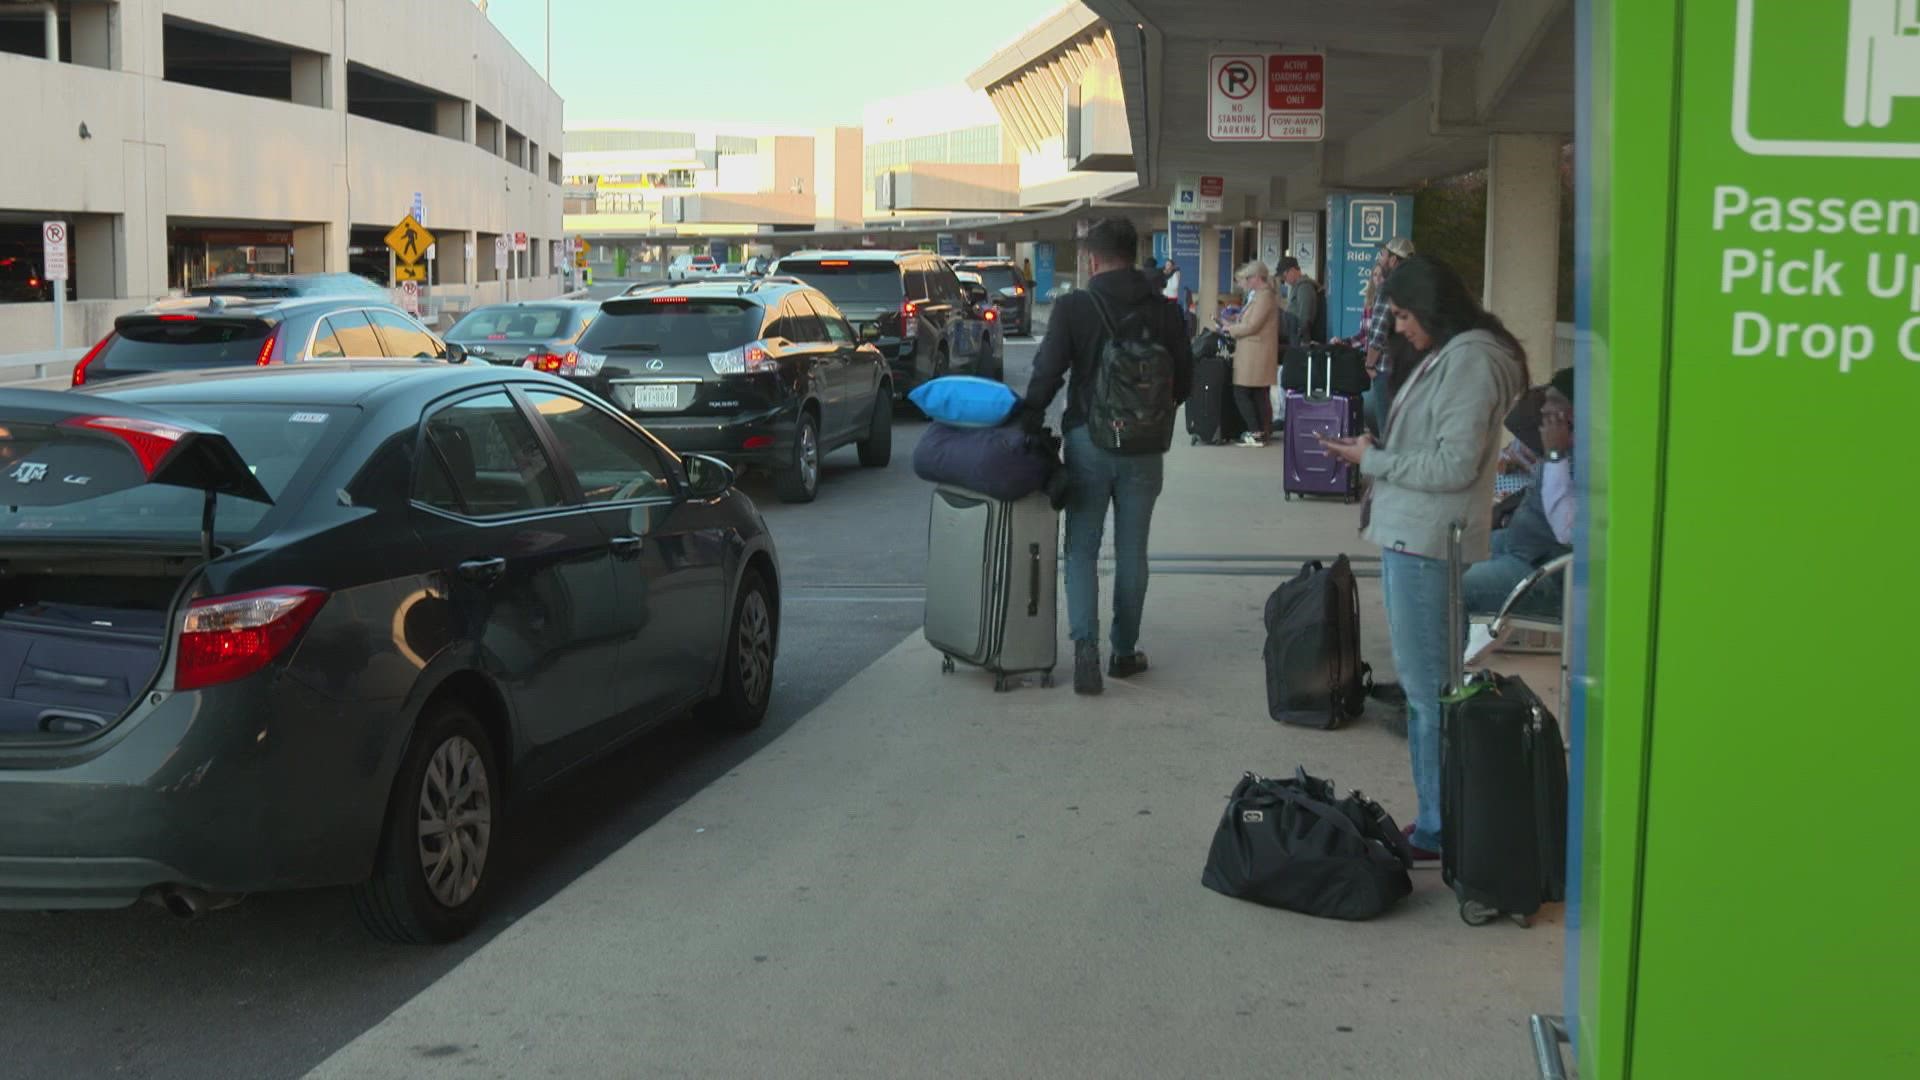 AAA predicts at least 4.5 million people are flying across the country this Thanksgiving holiday.